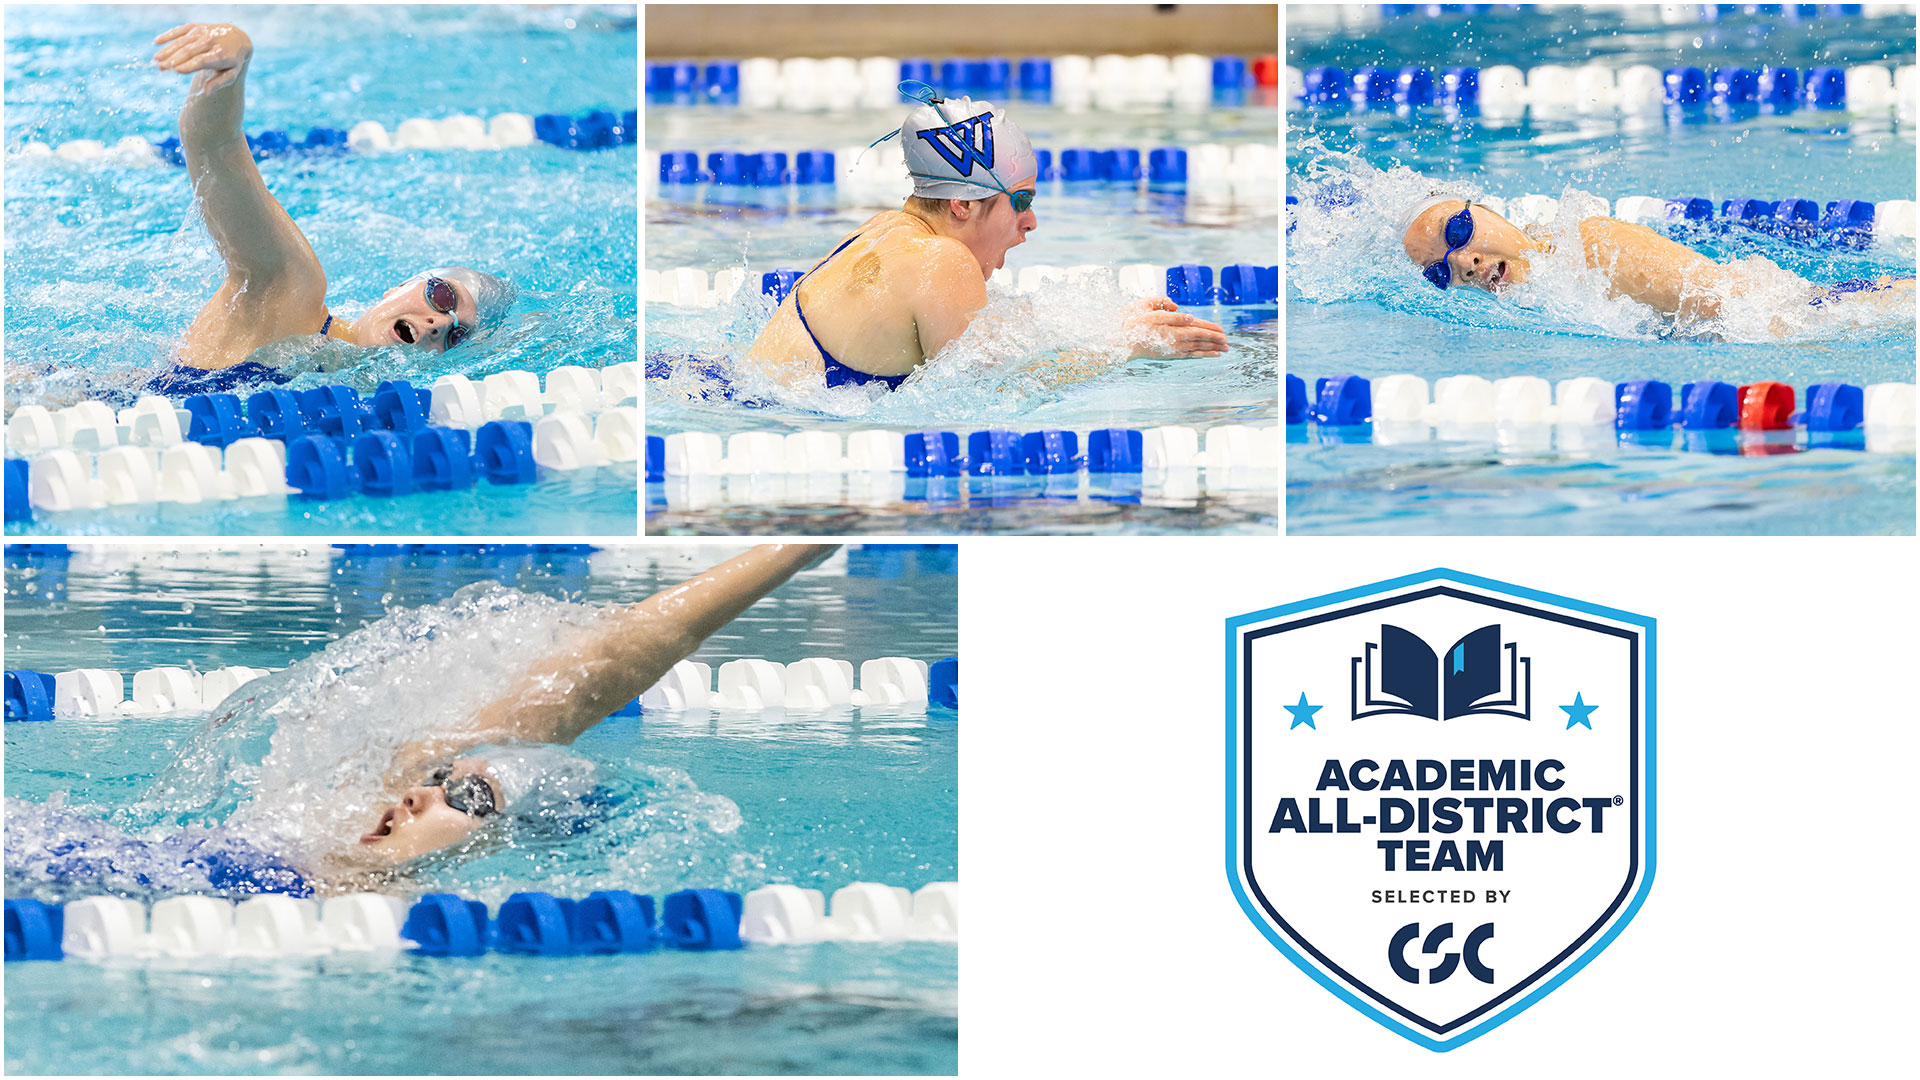 Four members of Wellesley swimming & diving earned CSC Academic All-District honors (Frank Poulin)